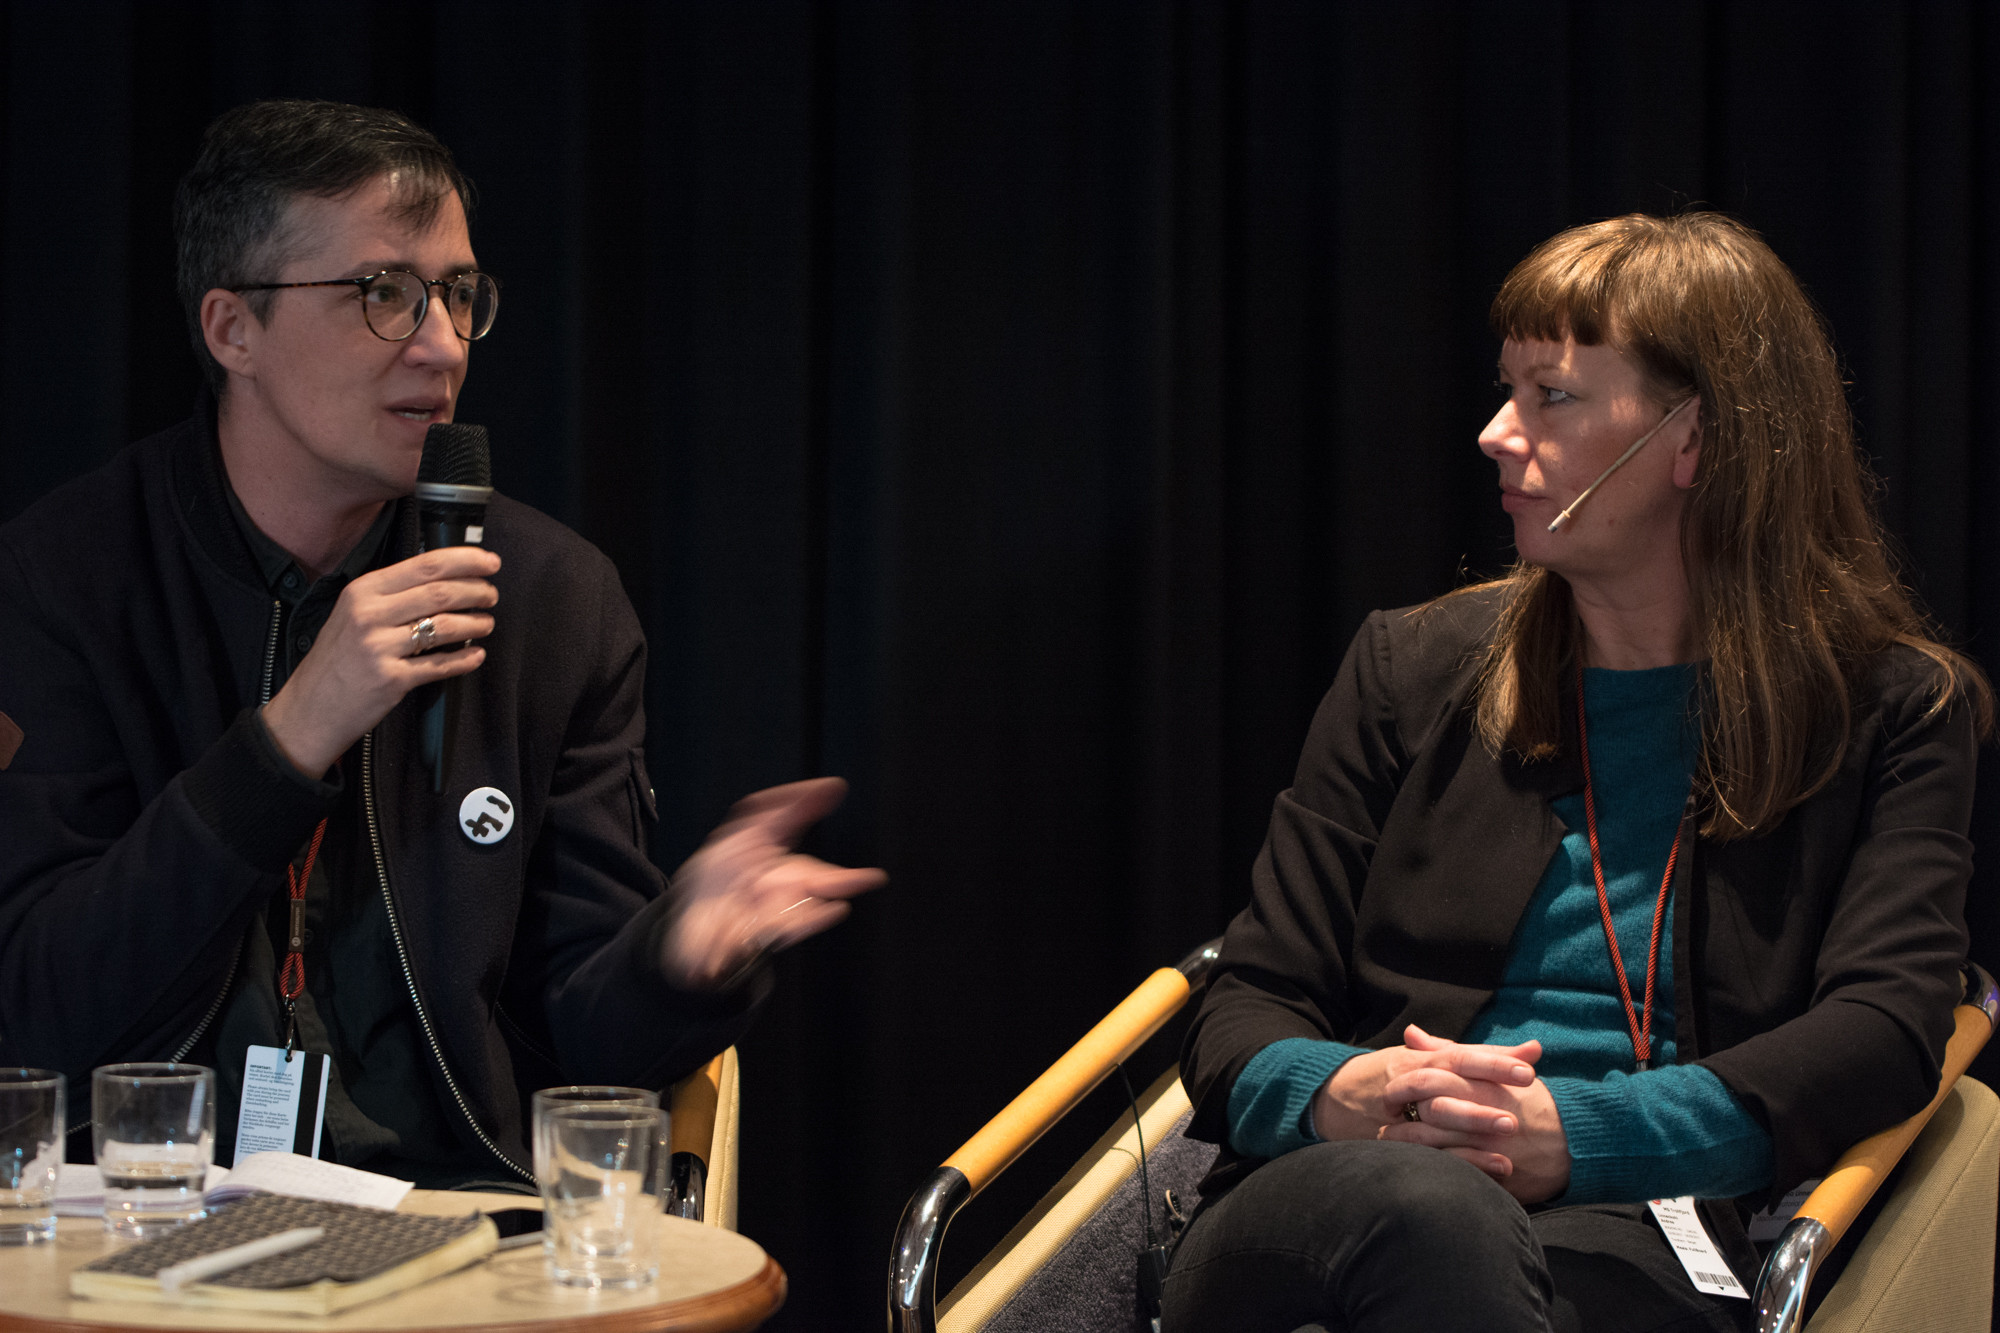 Curator Paul B. Preciado and curatorial advisor Andrea Linnenkohl from documenta14 participating in the conversation "Challenging the boarders of biennials", during Coasts first edition in 2017.  Photo: Laimonas Puisys.